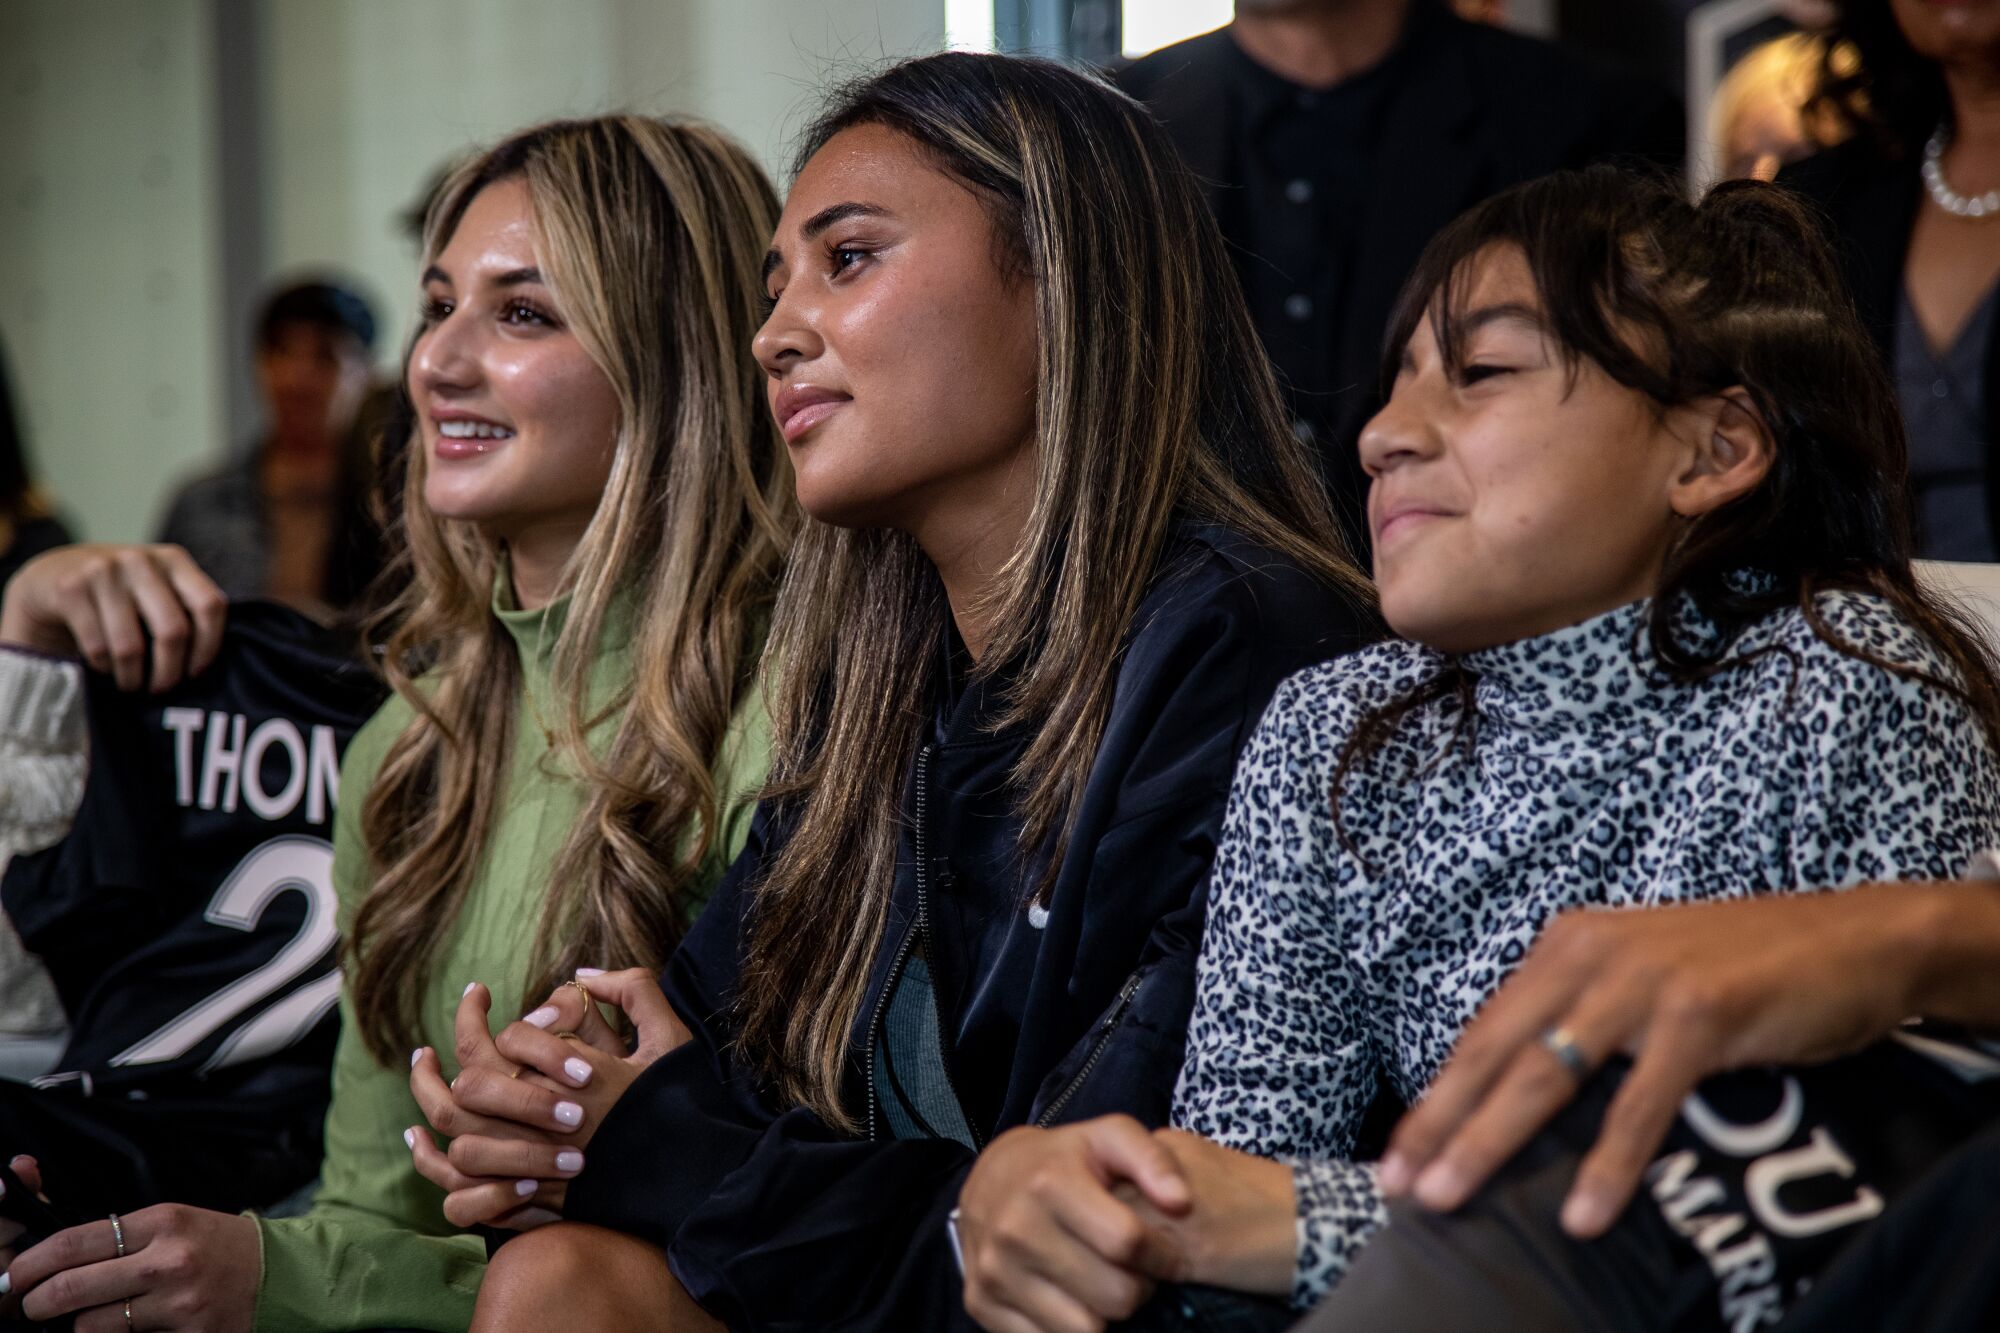 Seated between her sisters, Gisele, left, and Zoe, Alyssa Thompson waits with anticipation.